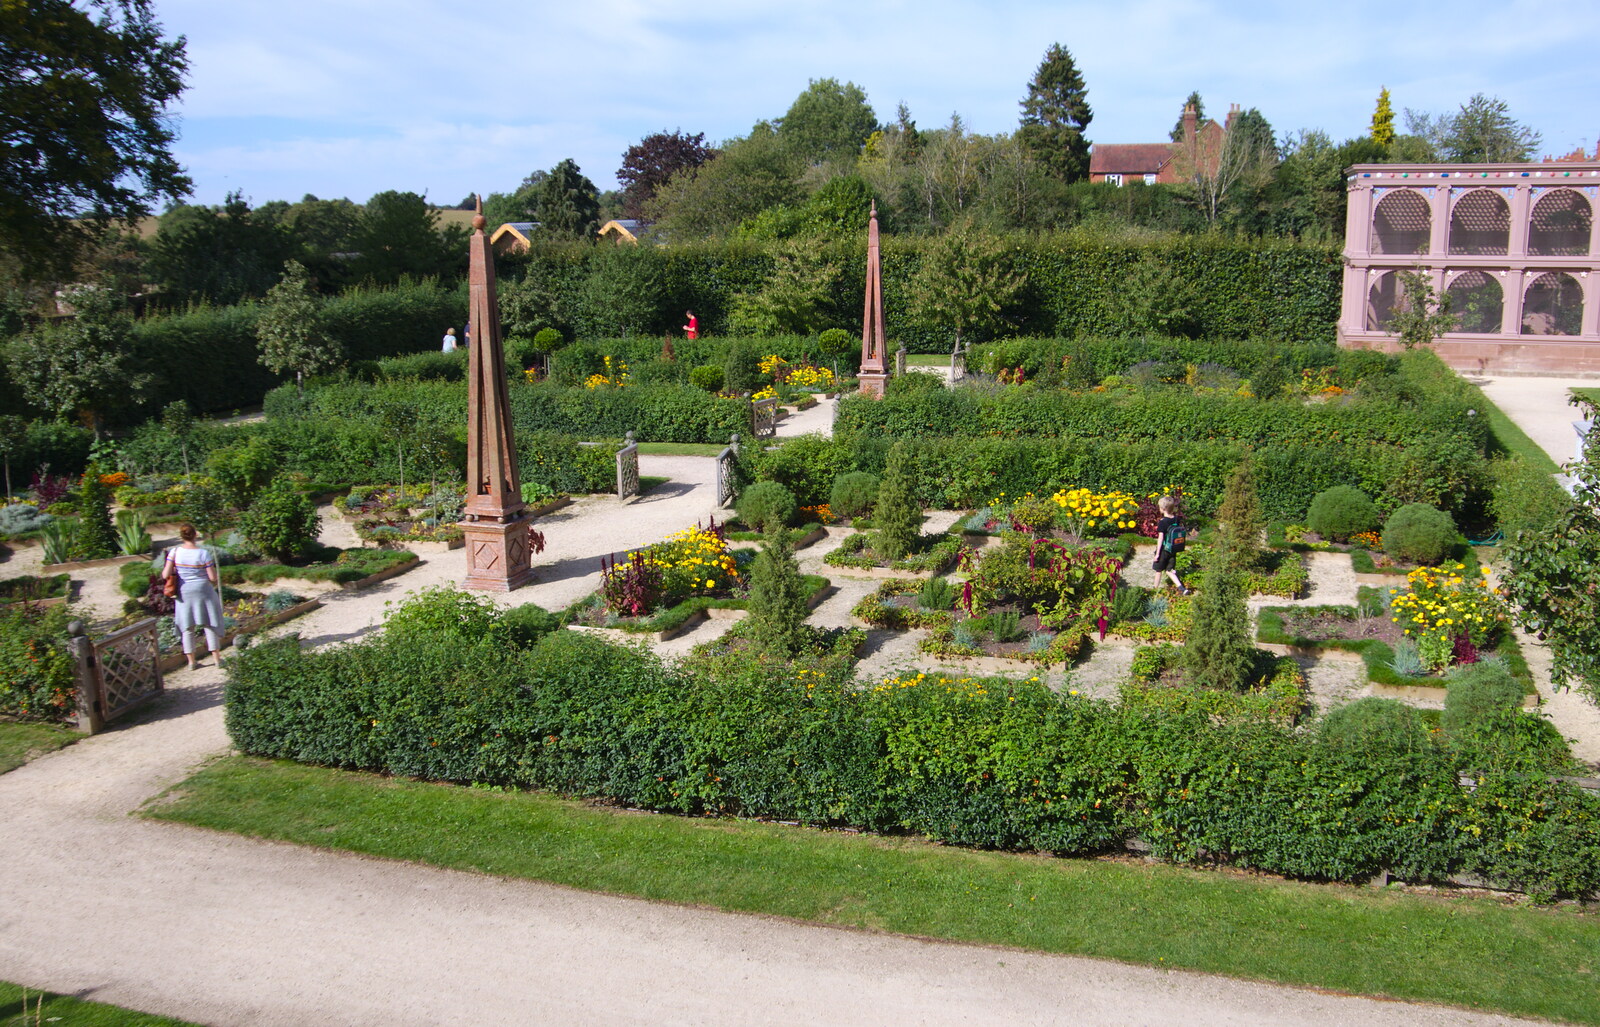 The Italianate garden from Kenilworth Castle and the 69th Entry Reunion Dinner, Stratford, Warwickshire - 14th September 2019